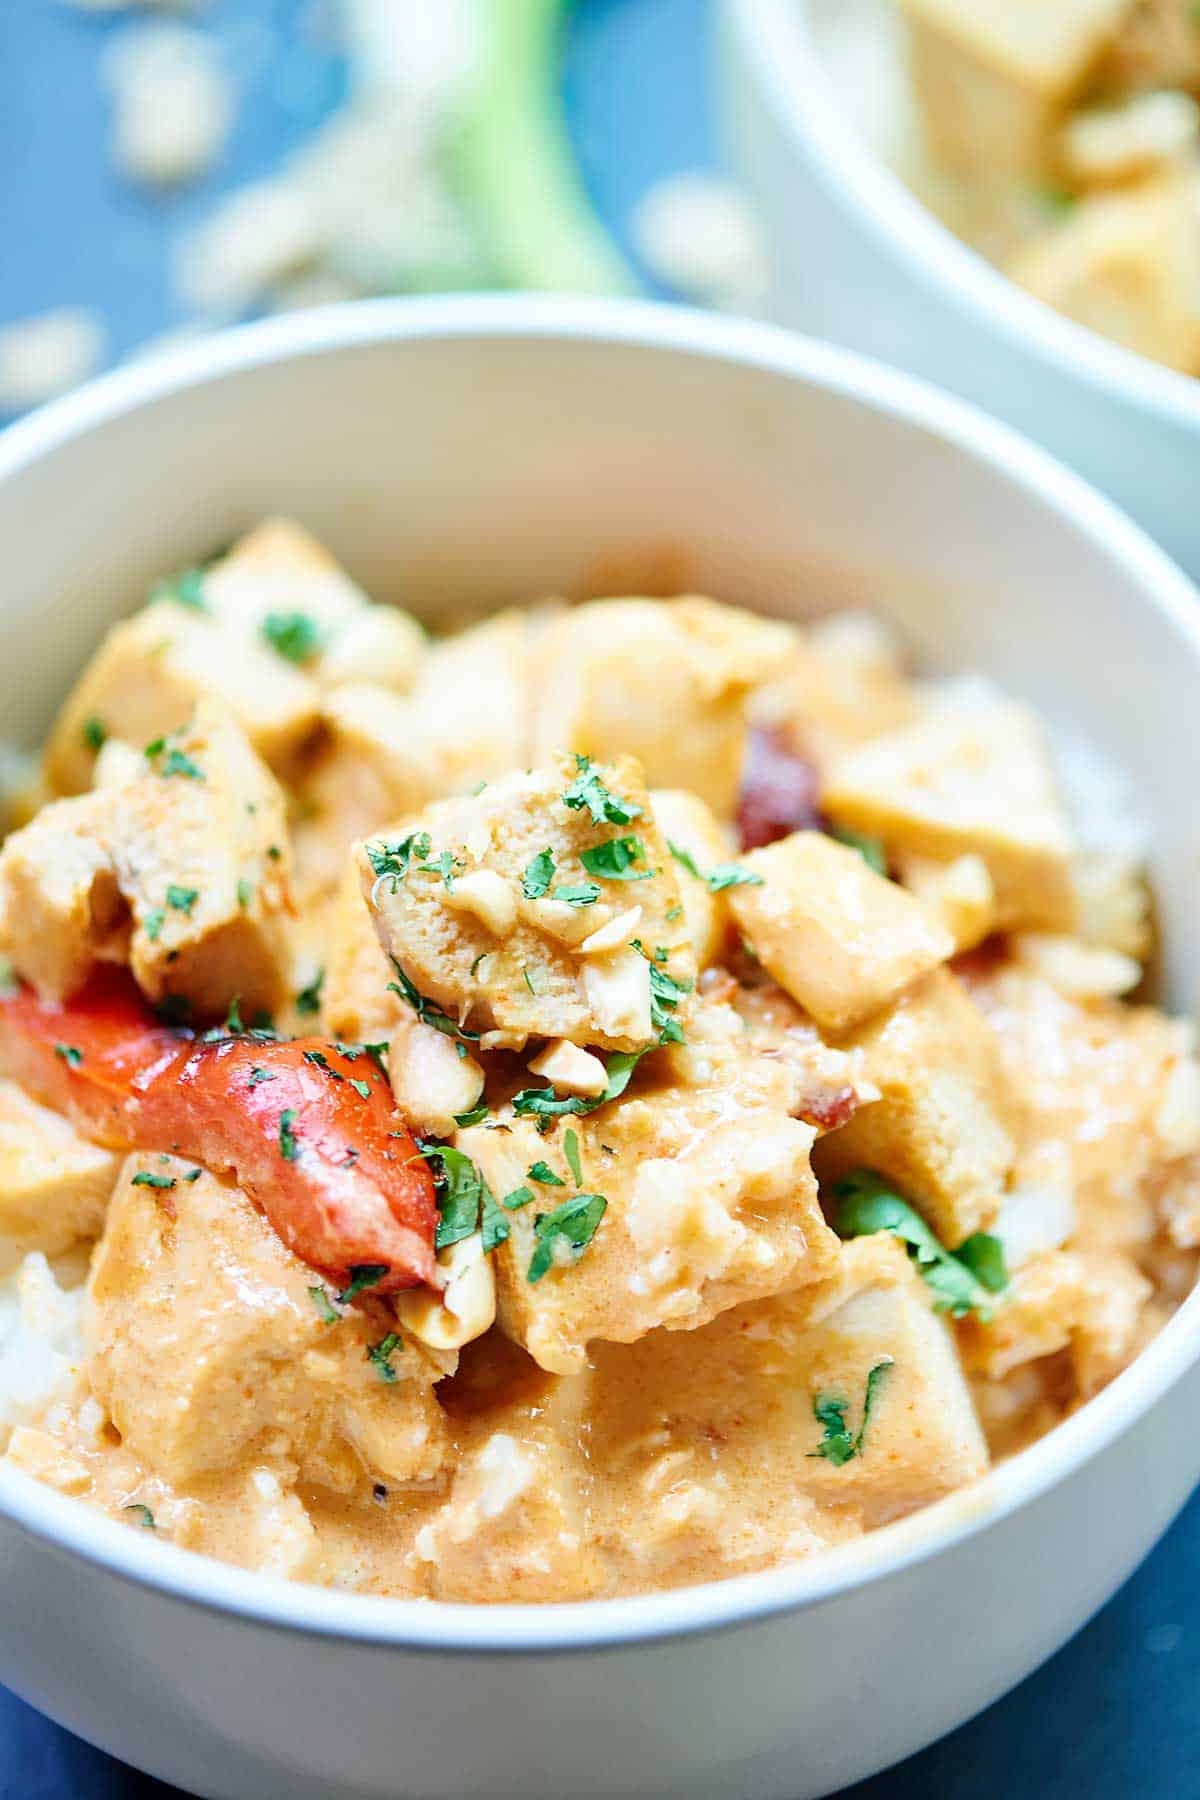 This Crockpot Thai Chicken Curry is healthy, tasty, & only takes one dish & five minutes to put together! 3 hours of cook time & you've got one yummy meal! showmetheyummy.com #crockpot #slowcooker #thai #chickencurry